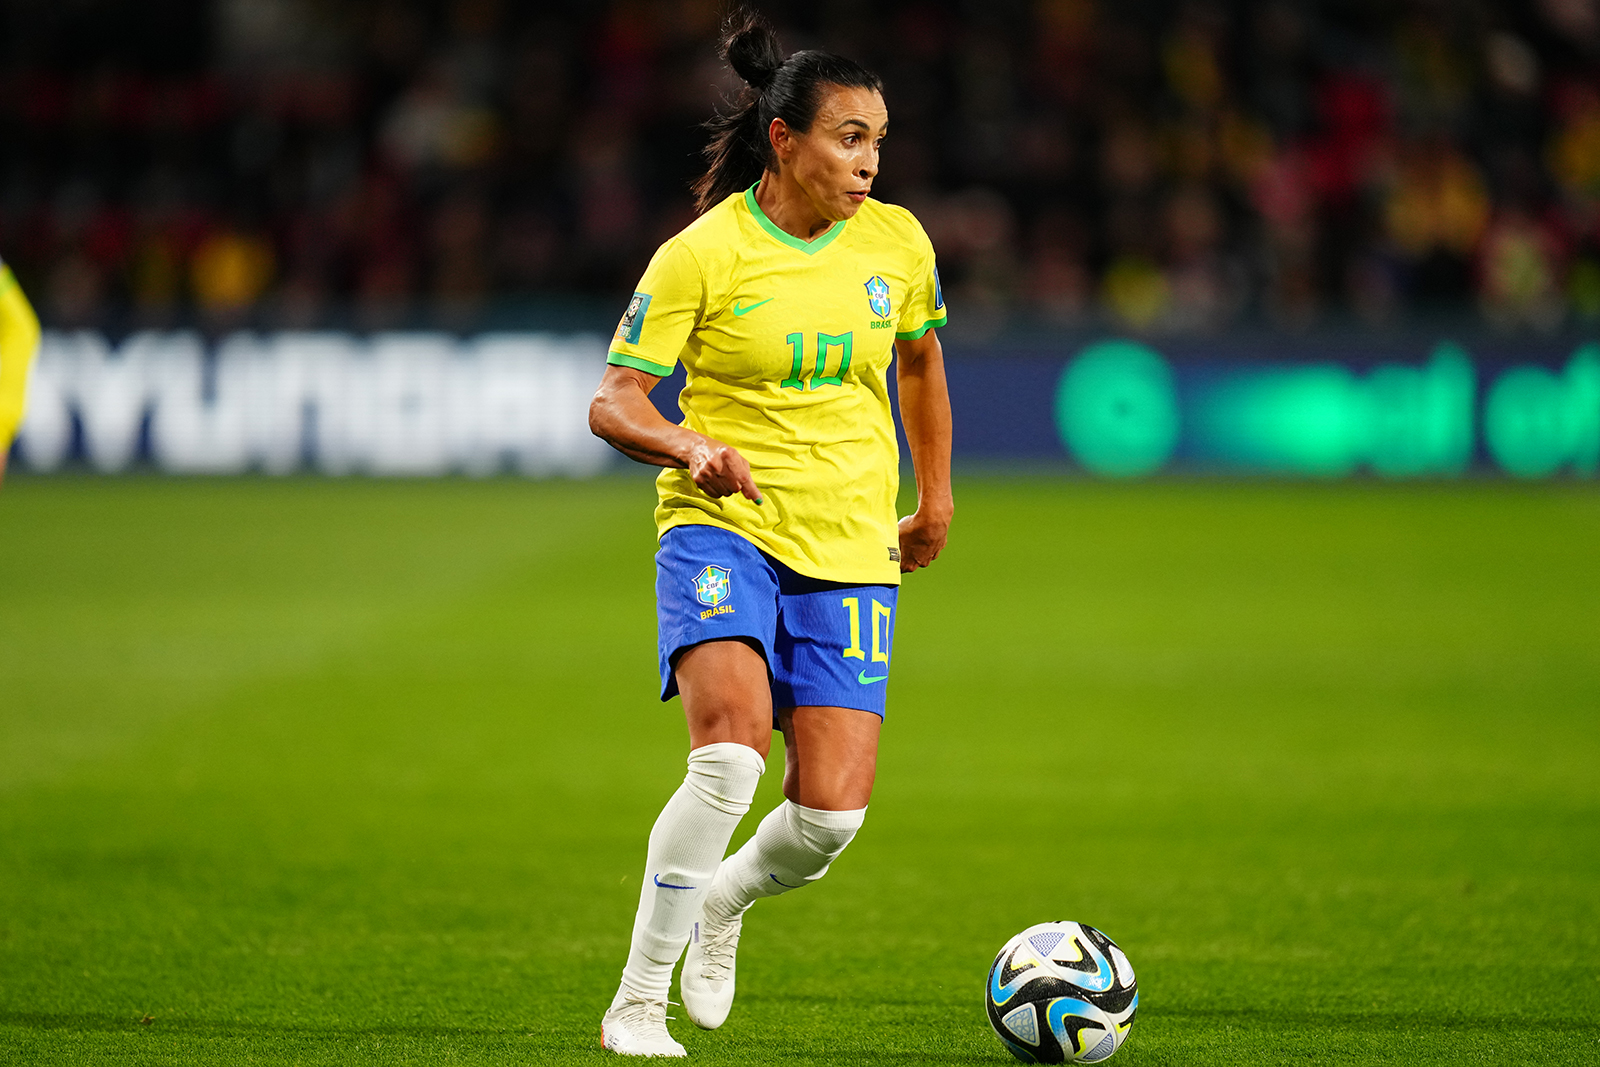 Marta of Brazil controls the ball during the match against Panama in Adelaide, Australia on July 24.